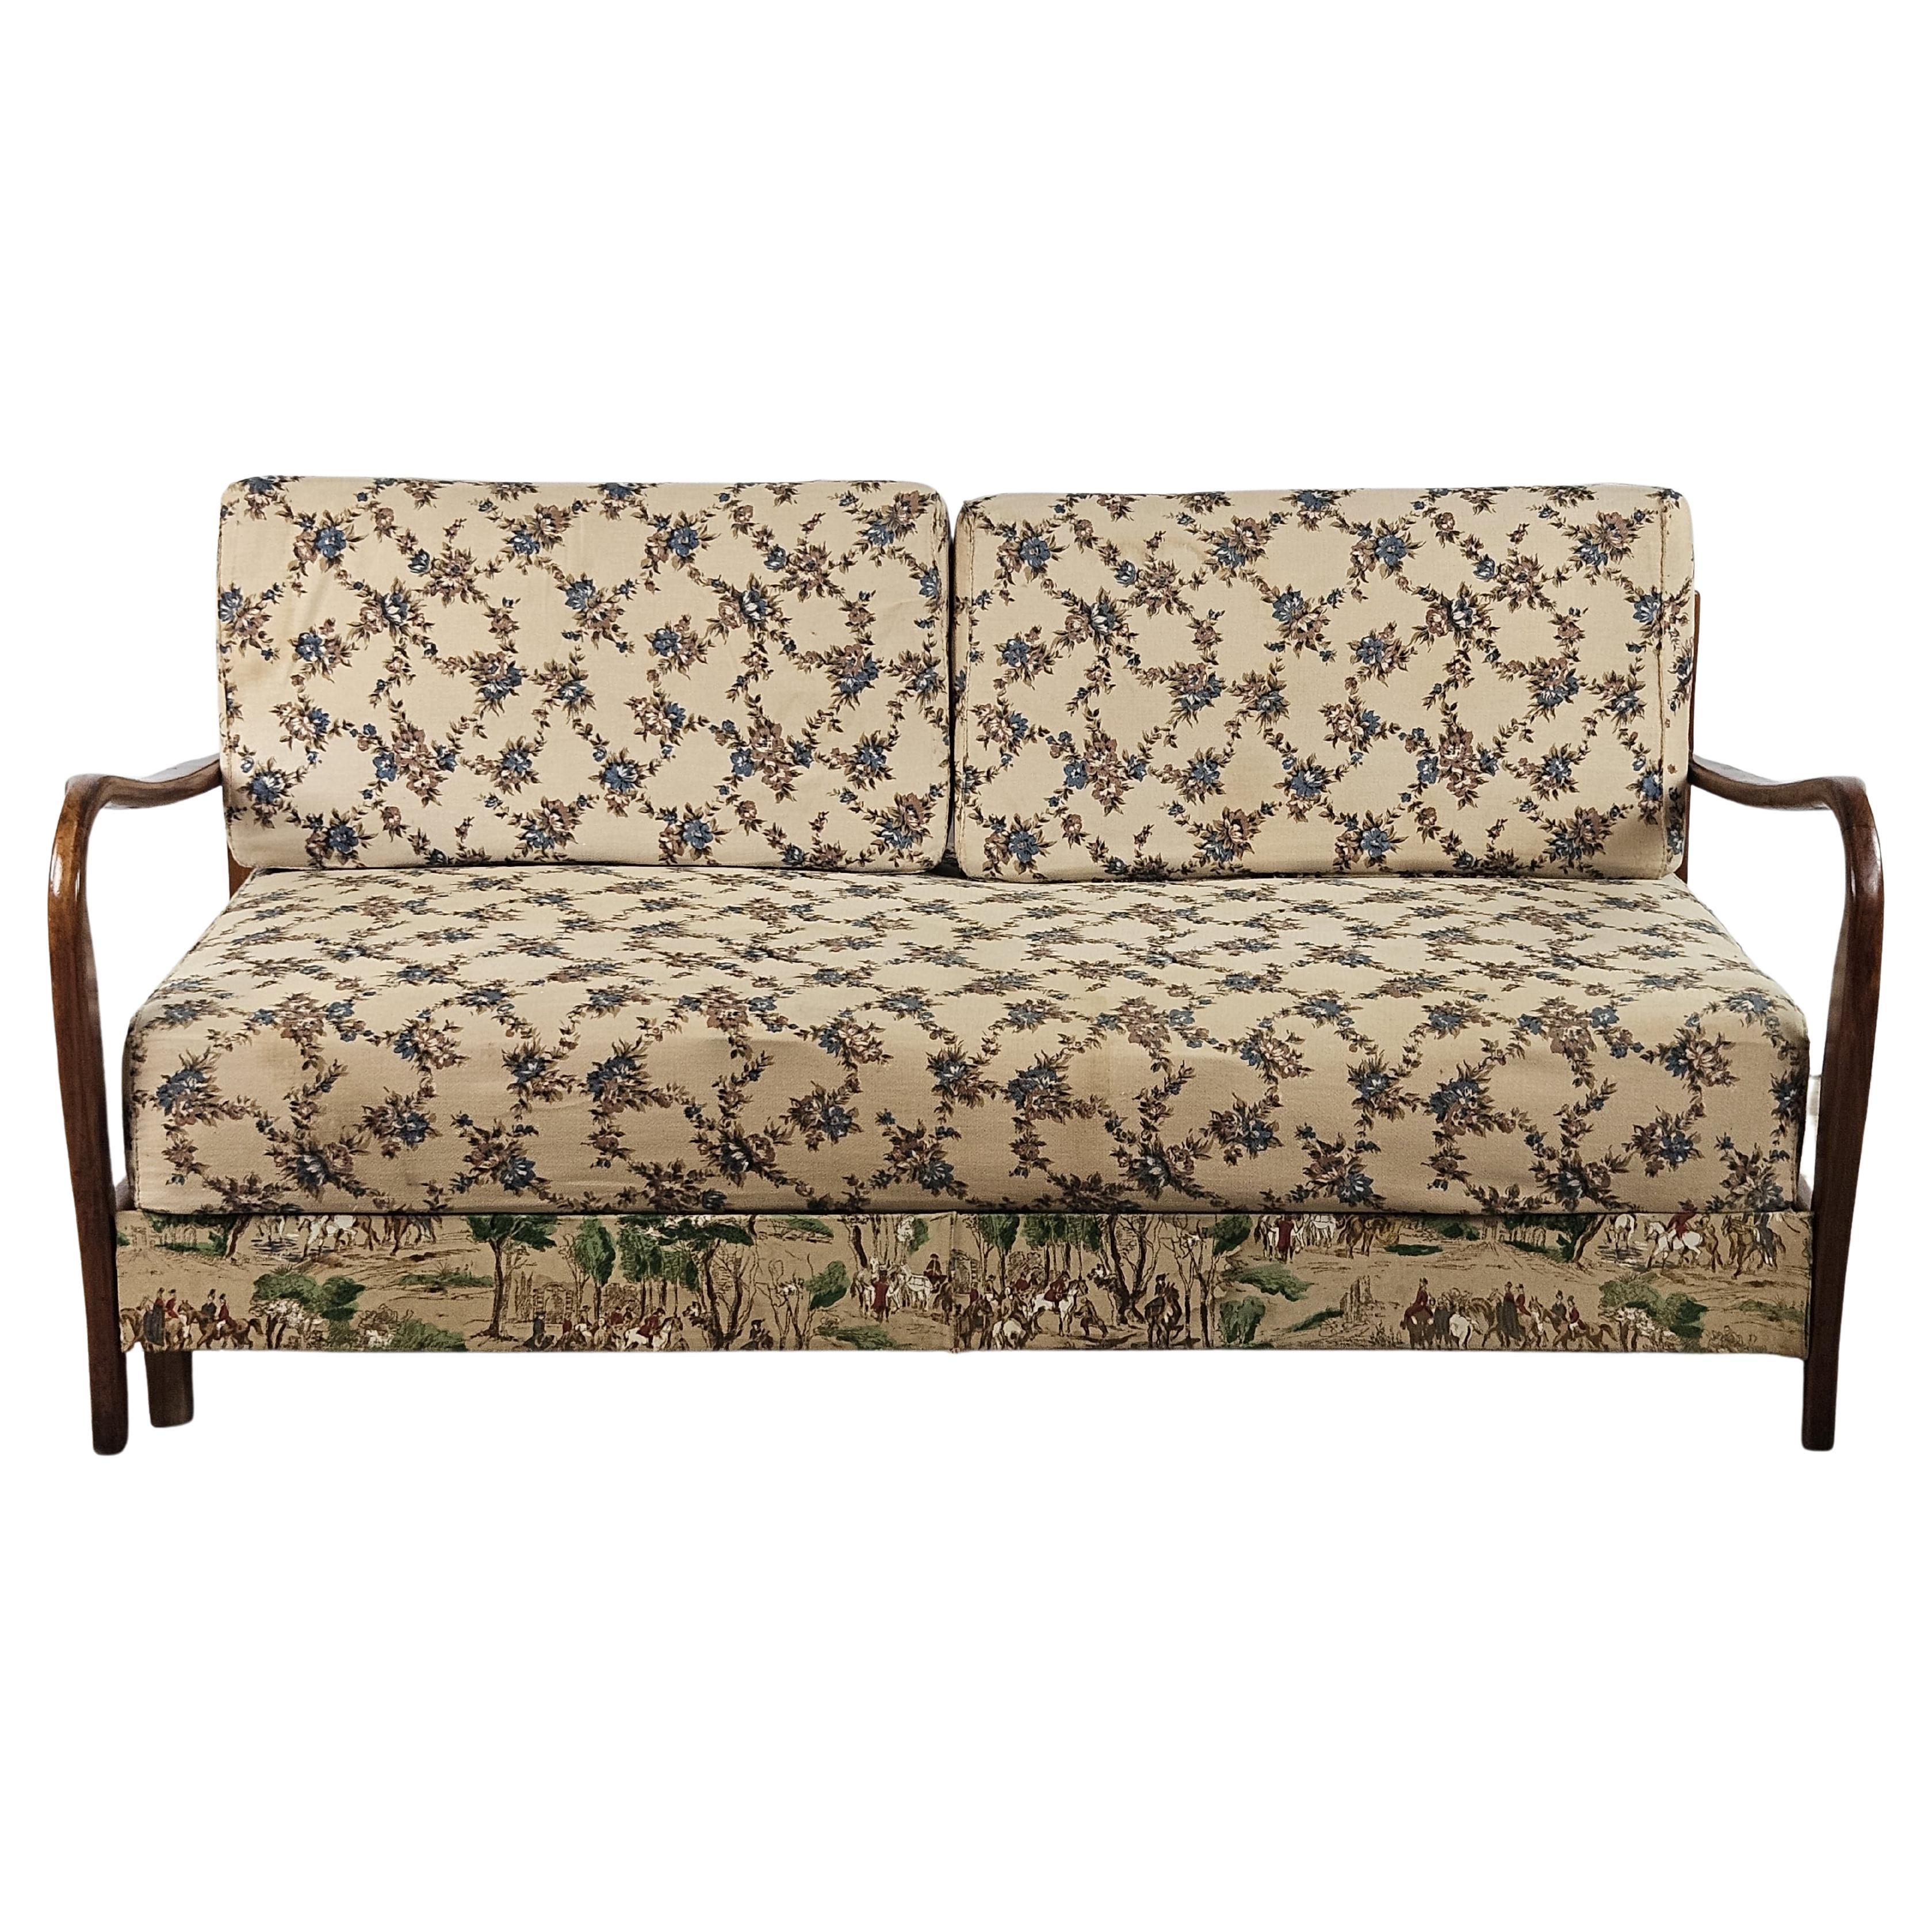 1950s beechwood dormeuse with fabric upholstery For Sale